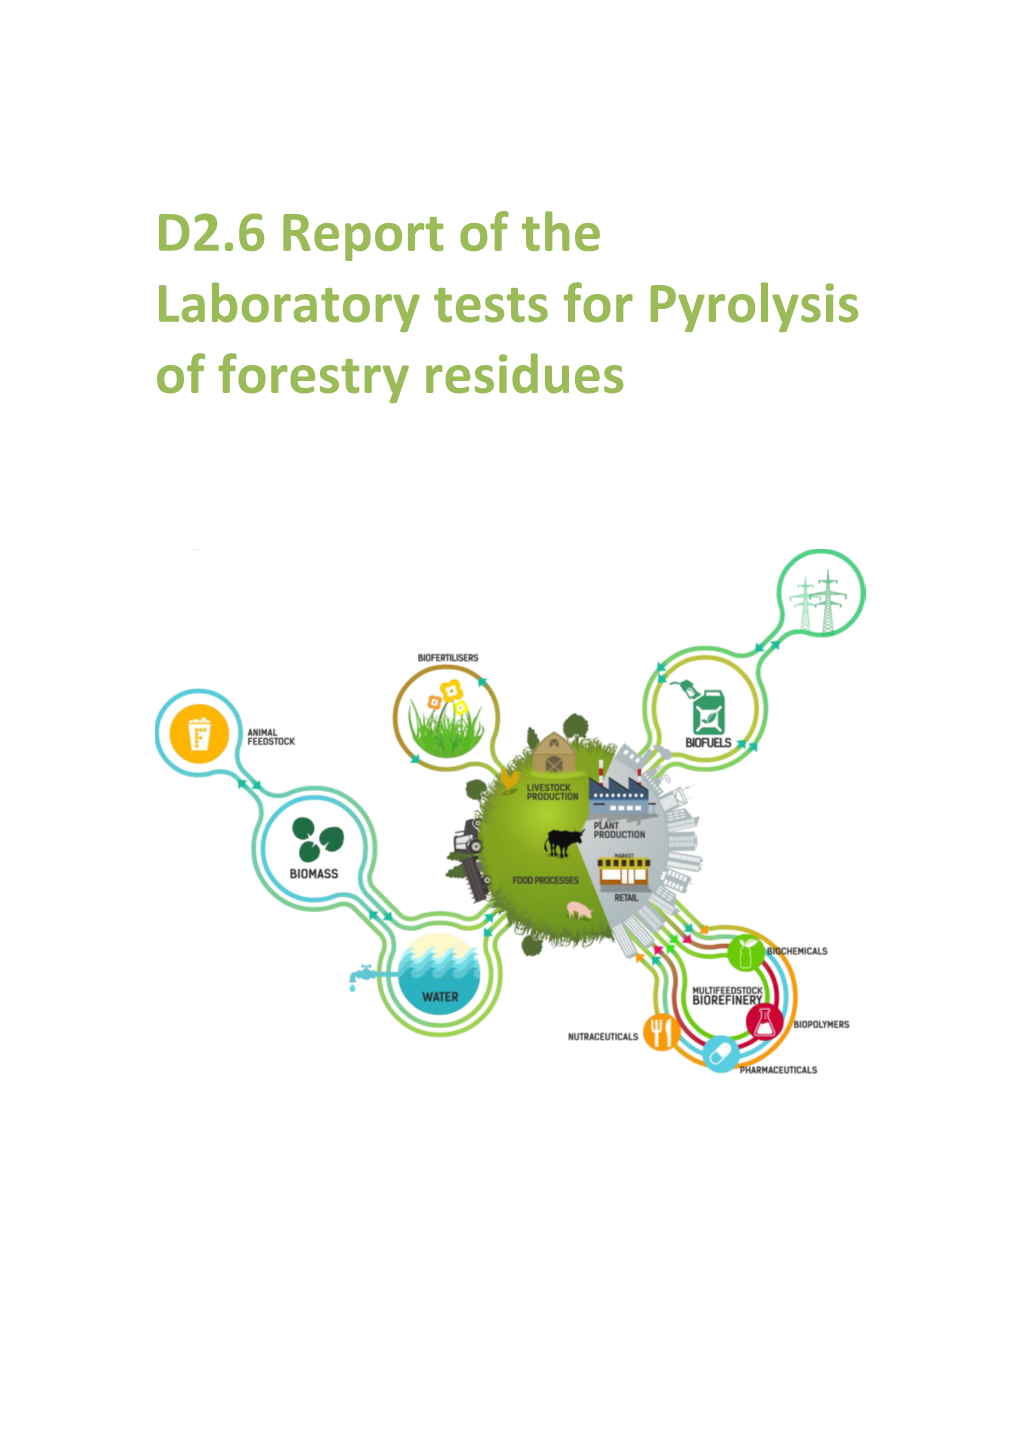 D2.6 Report of the Laboratory Tests for Pyrolysis of Forestry Residues